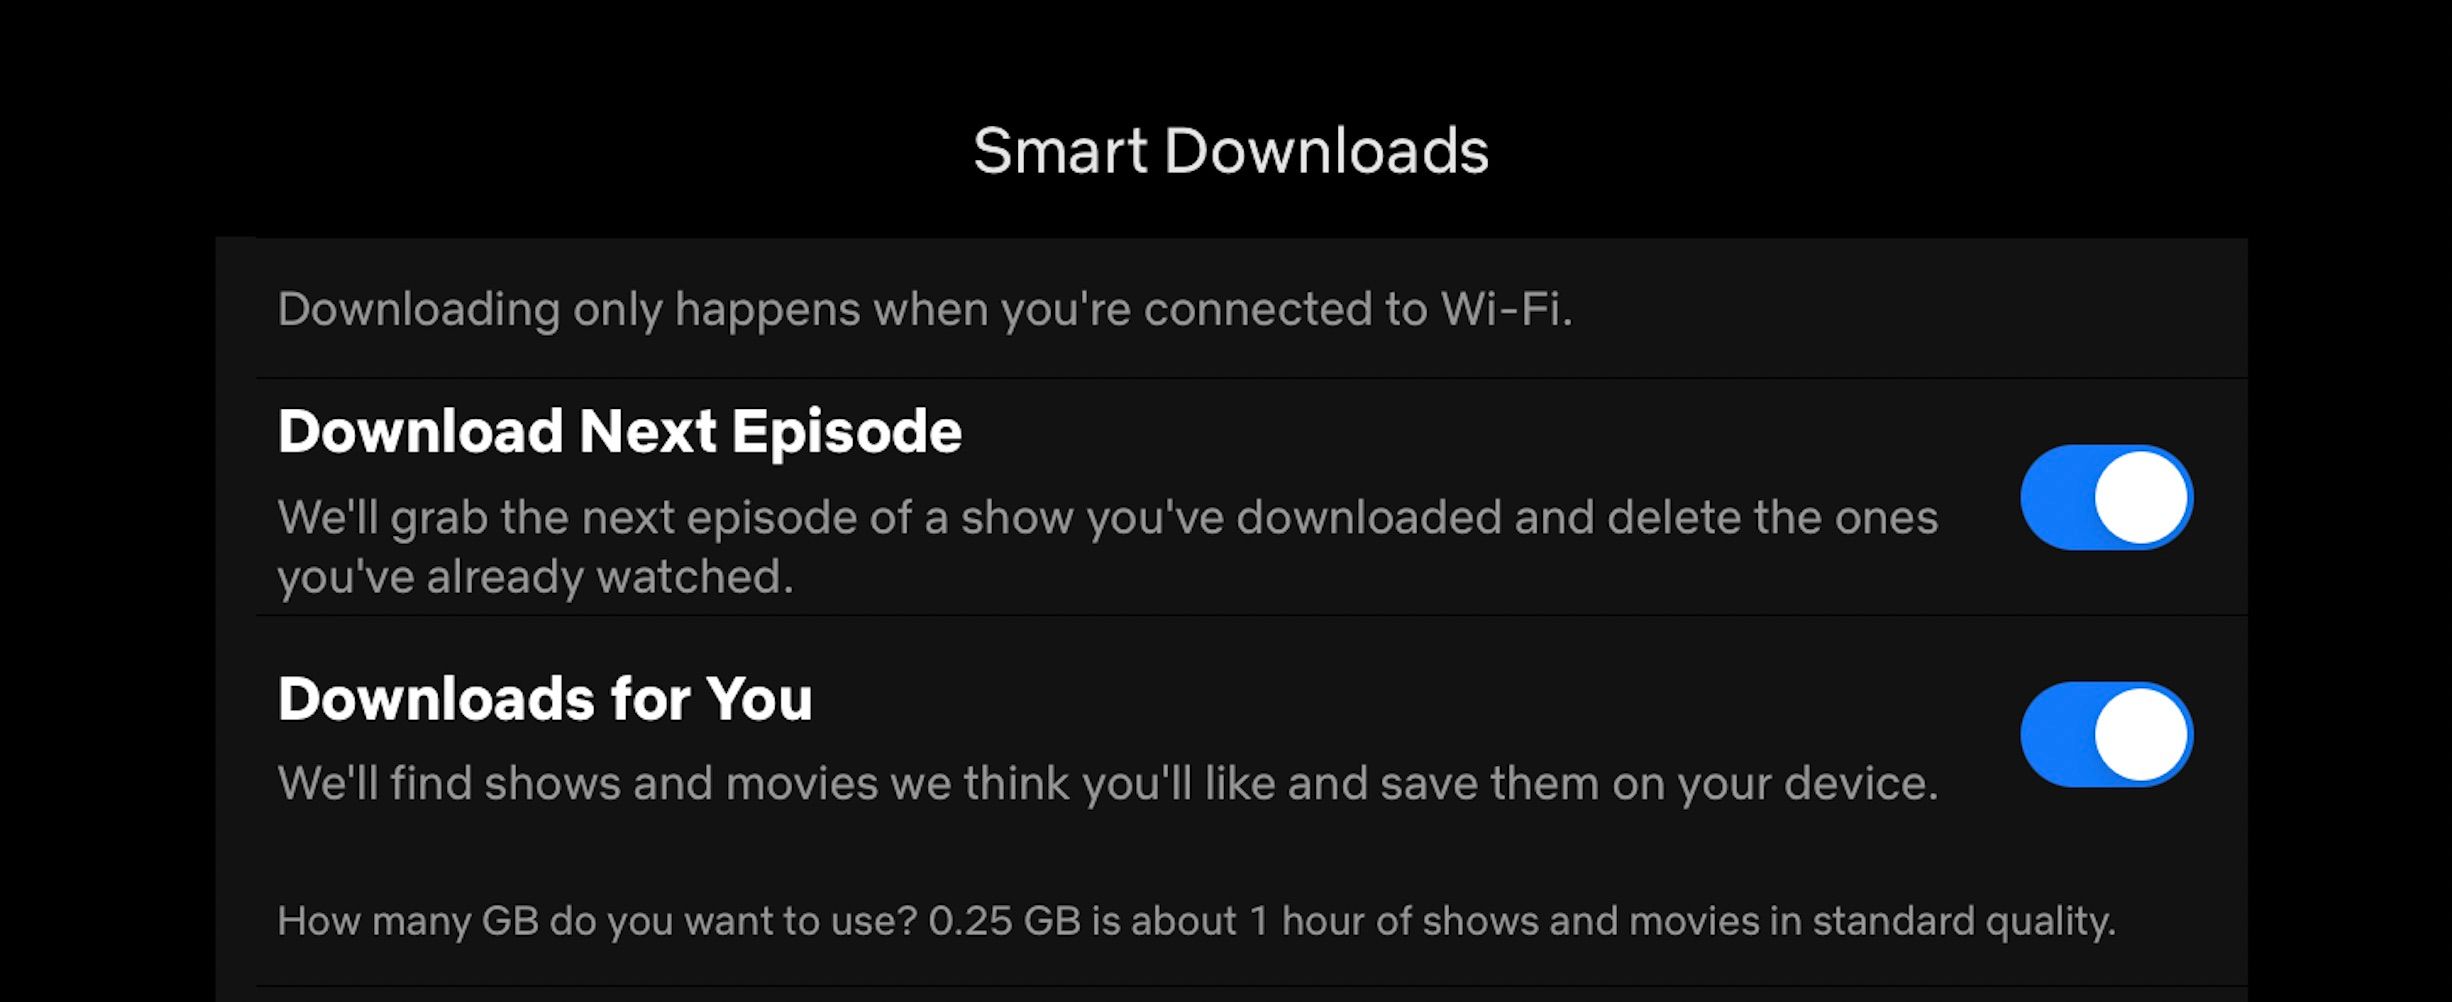 Netflix downloads for you toggle page with download next episode toggle